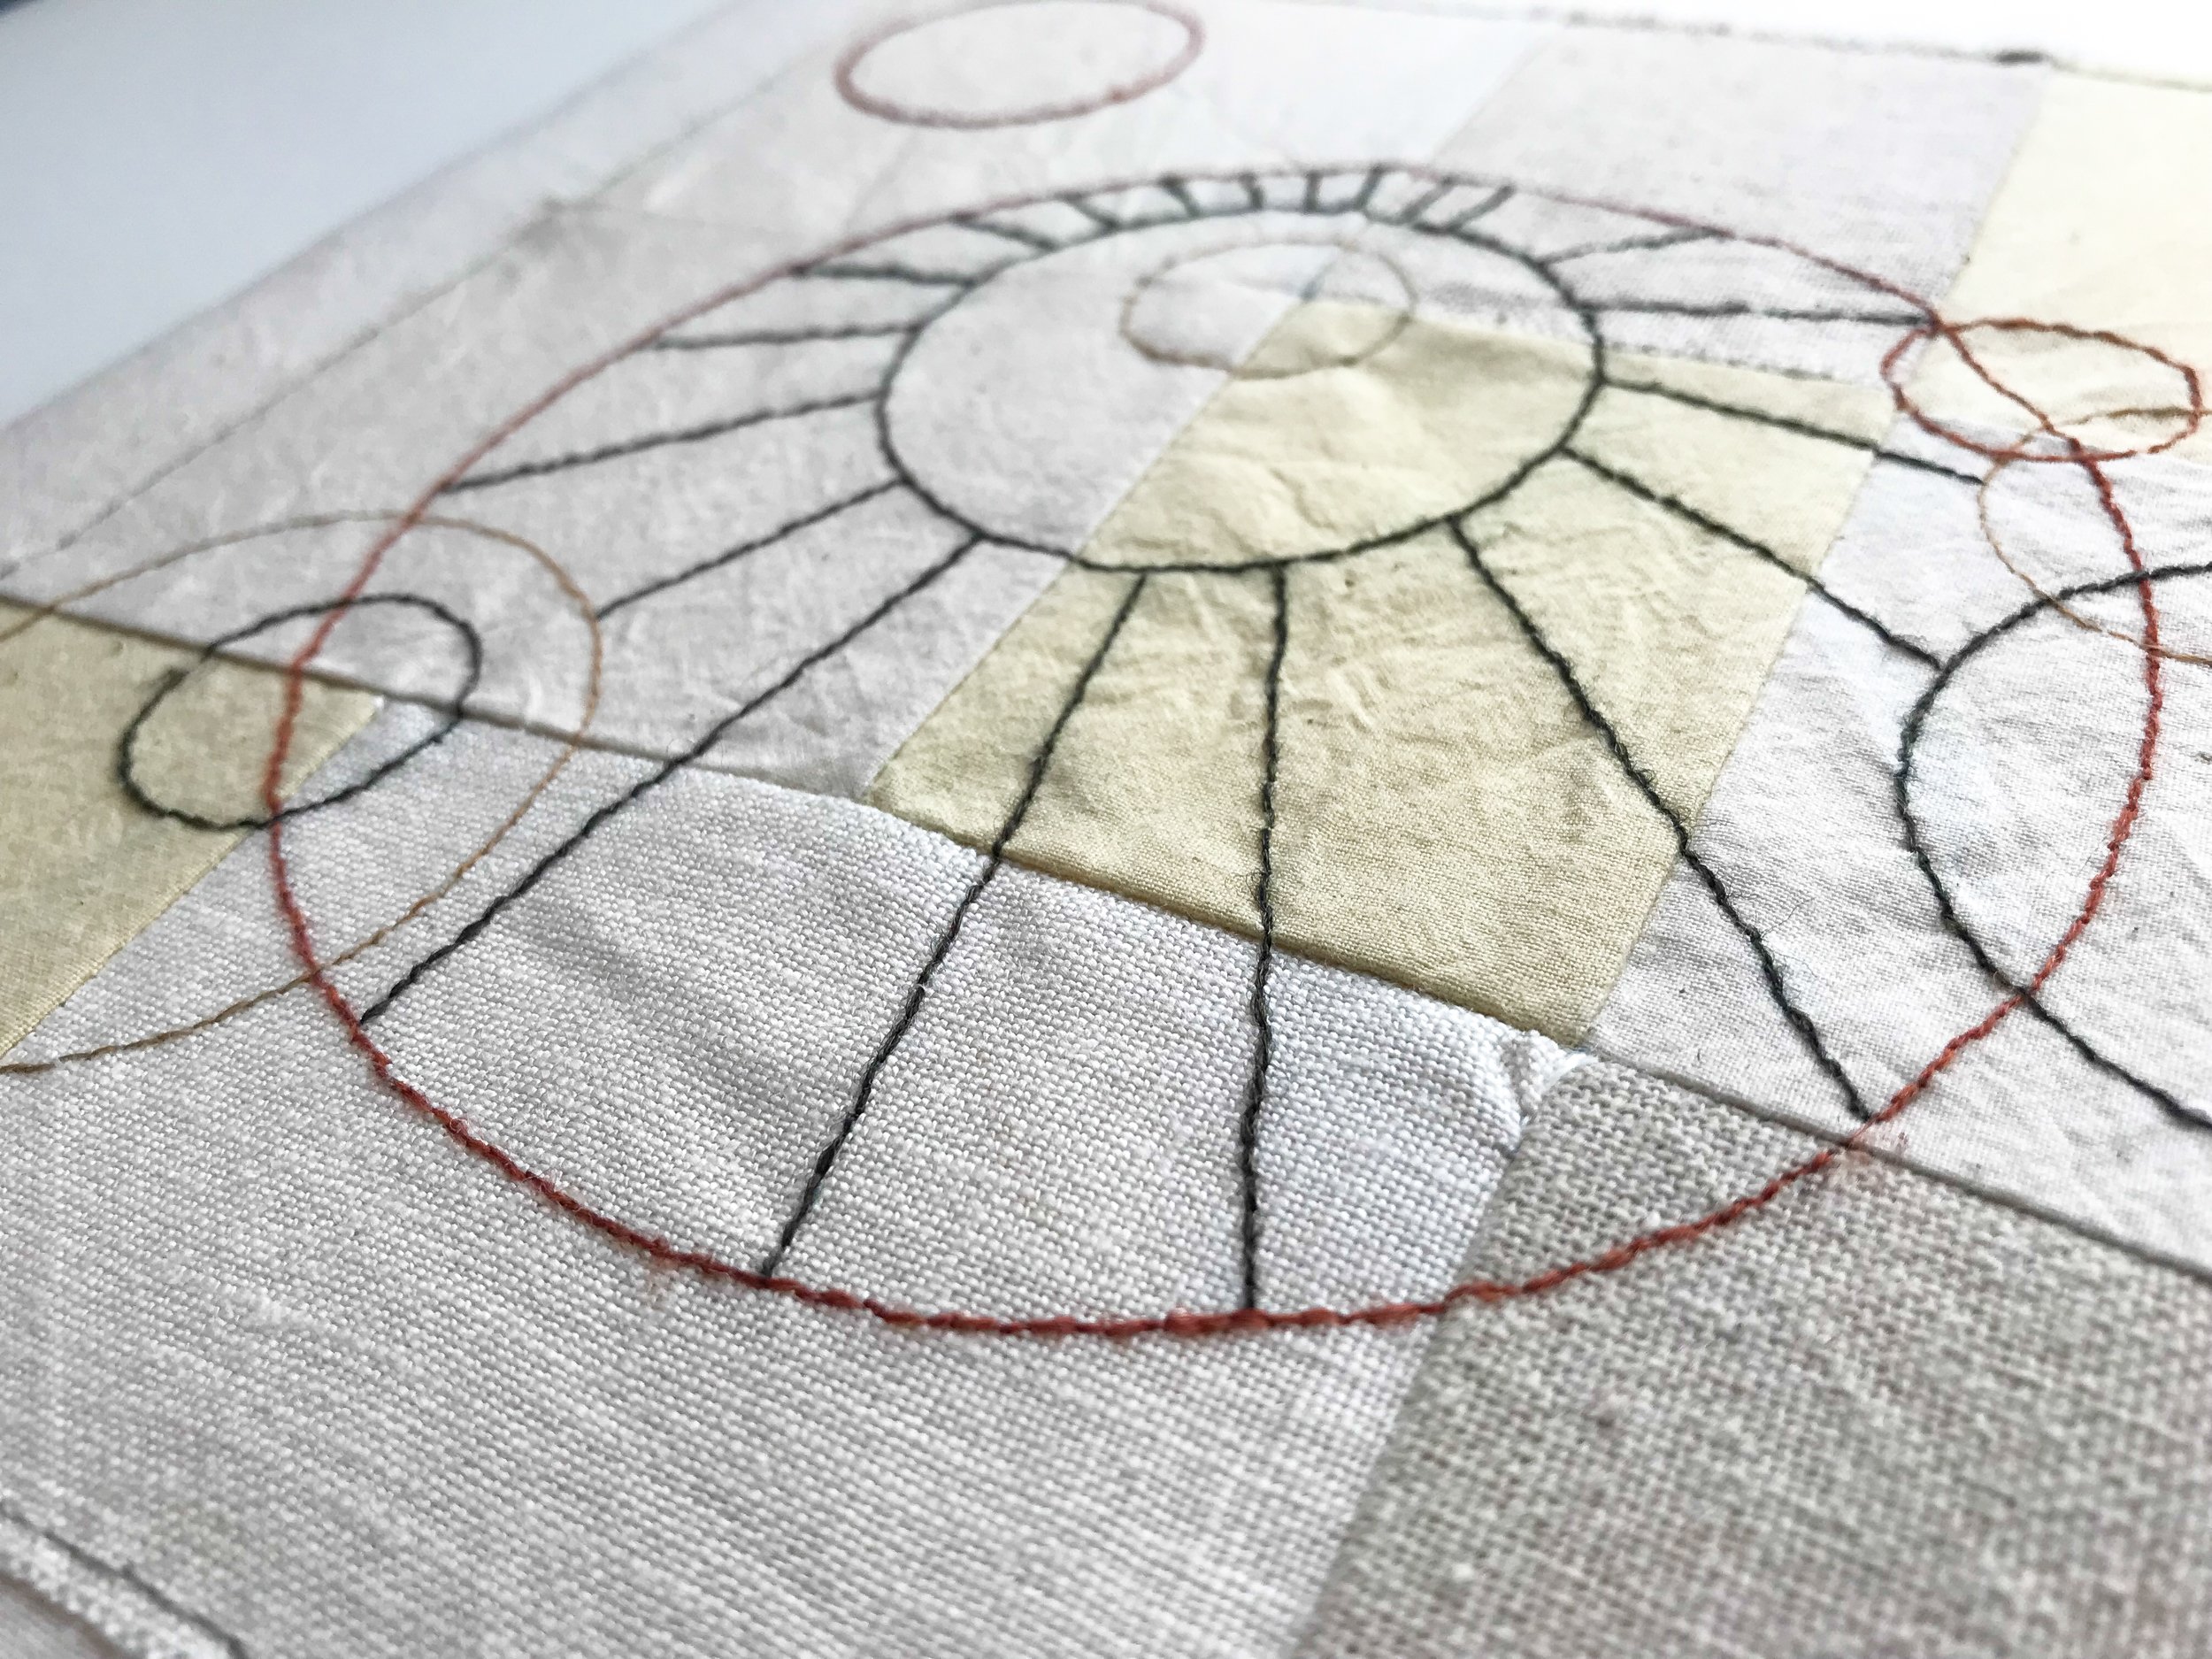  Patterns stitched on hand-dyed linen and cotton fabric. 